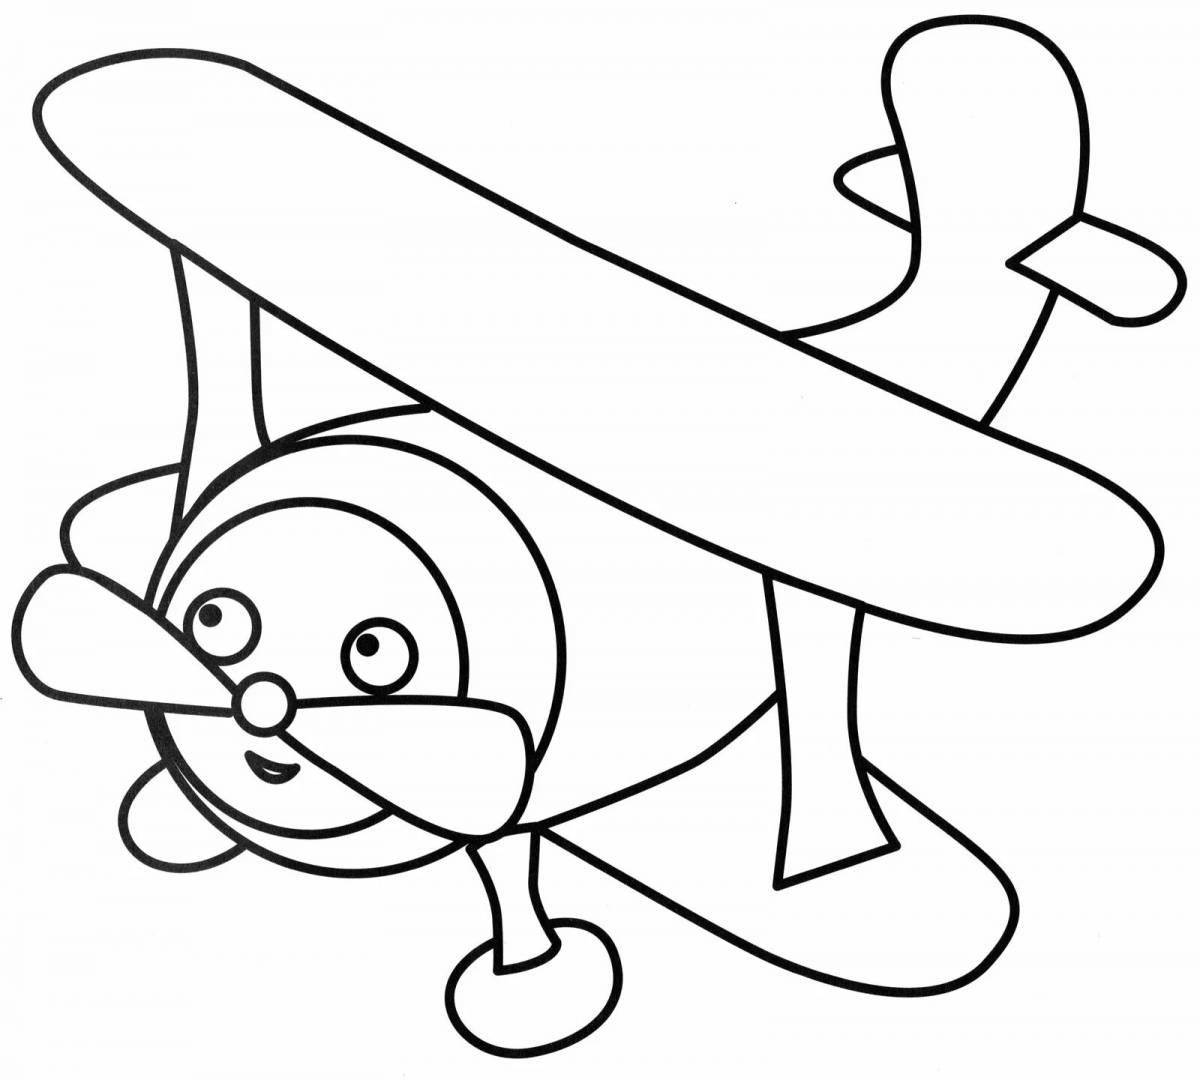 Glorious plane coloring for kids